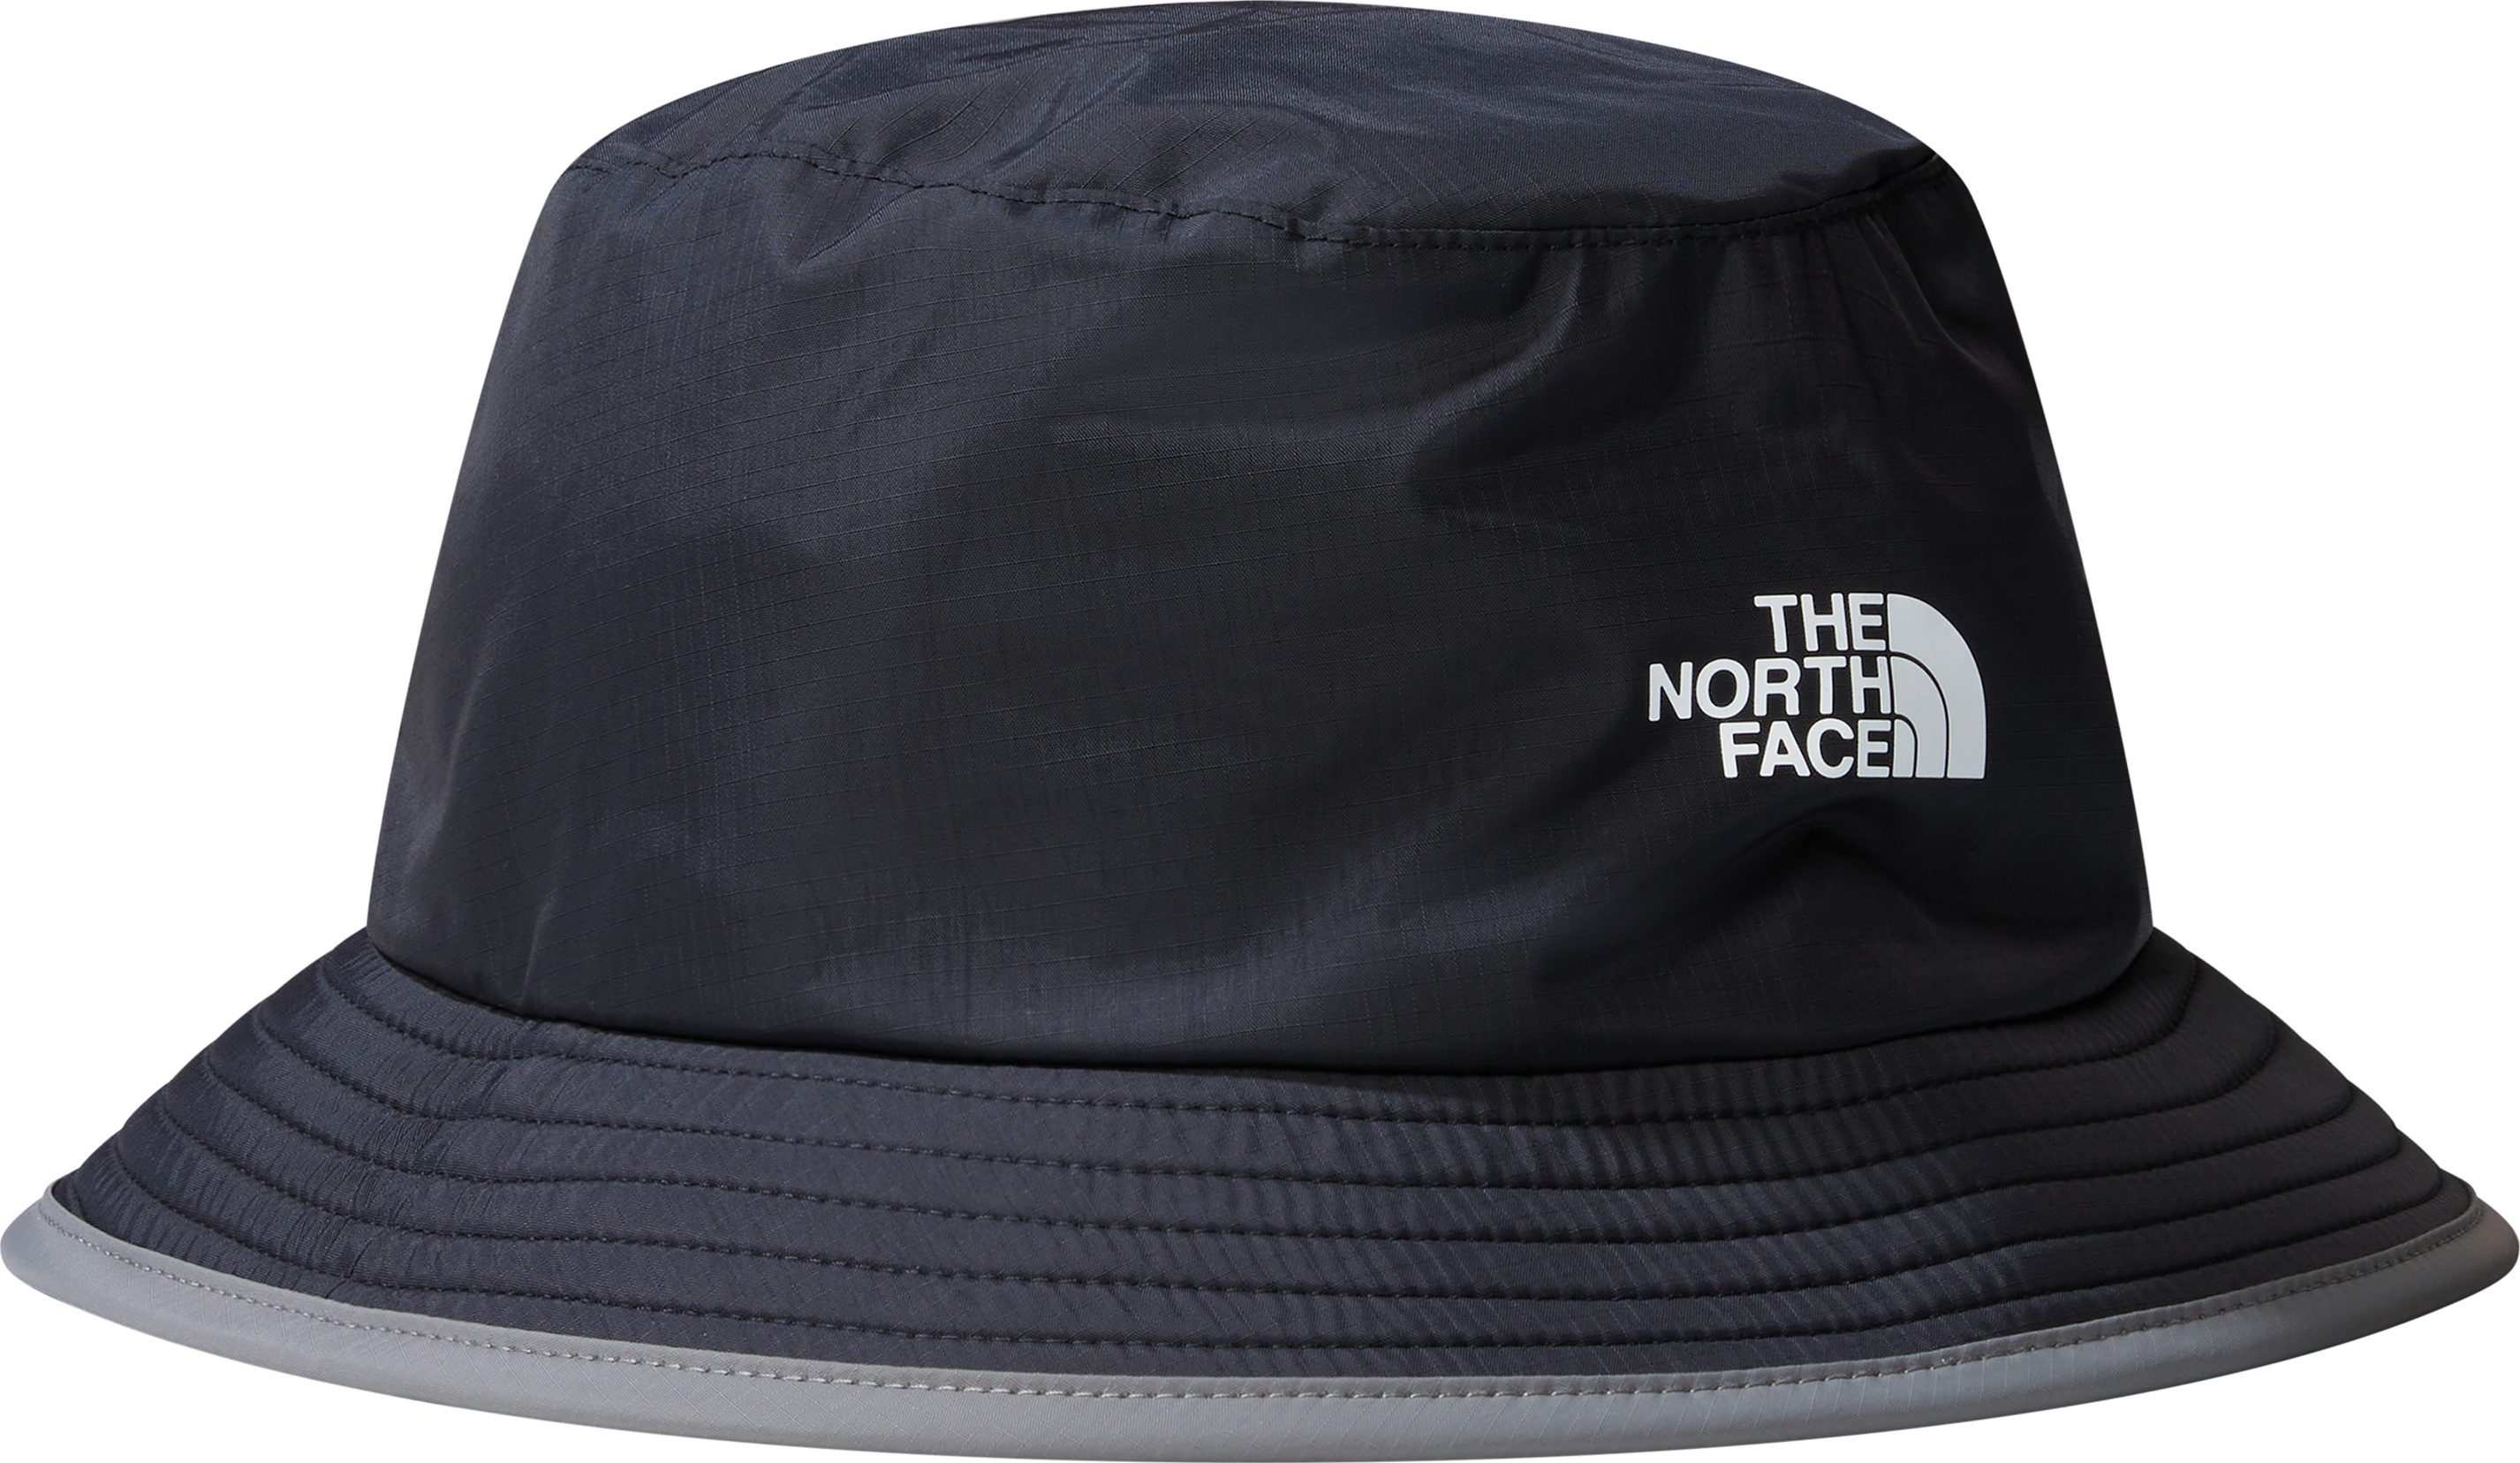 The North Face The North Face Antora Rain Bucket Hat TNF Black/Smoked Pearl LXL, Tnf Black/Smoked Pearl